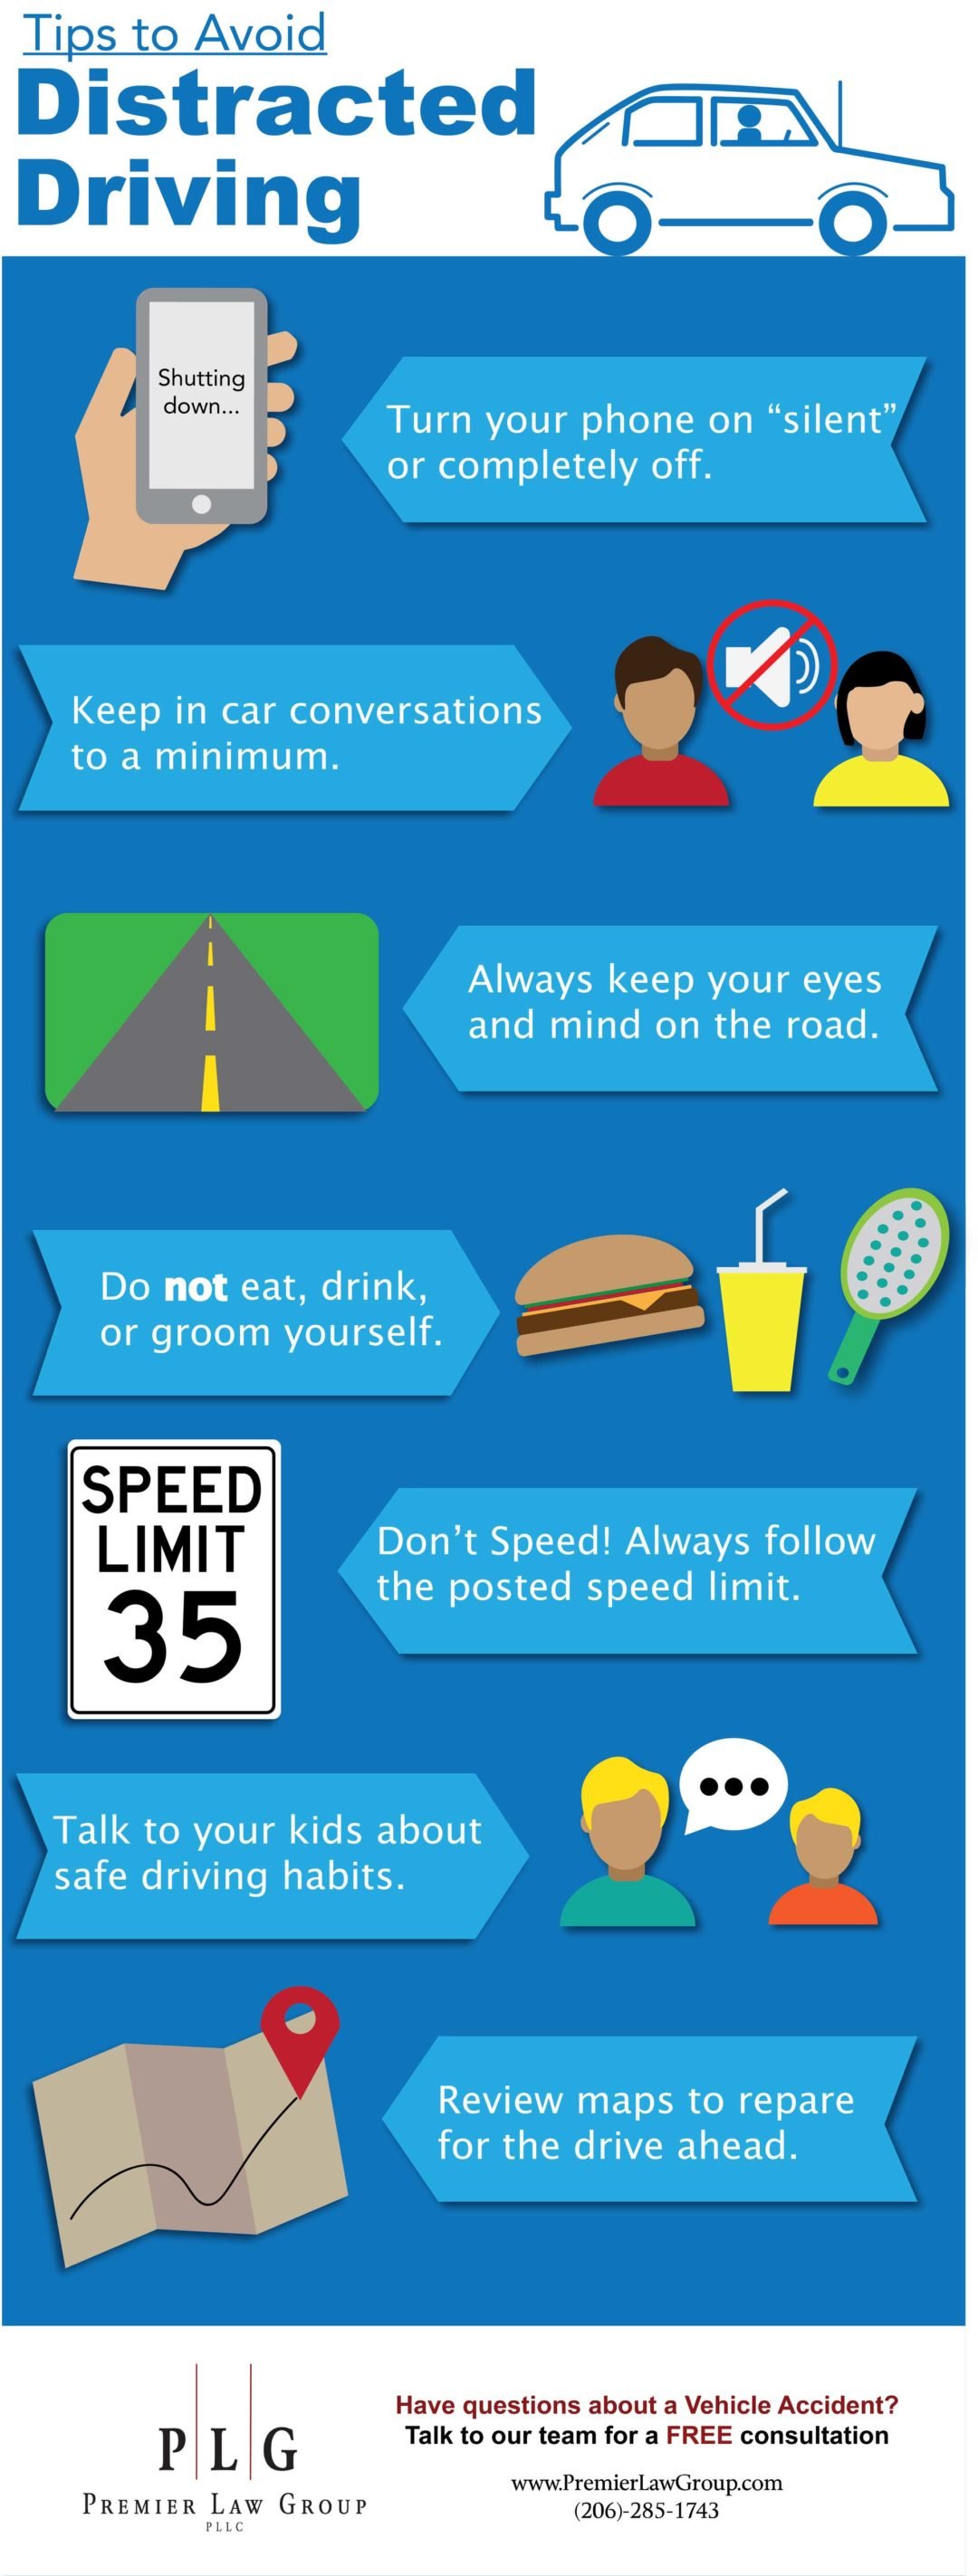 Tips to avoid Distracted Driving